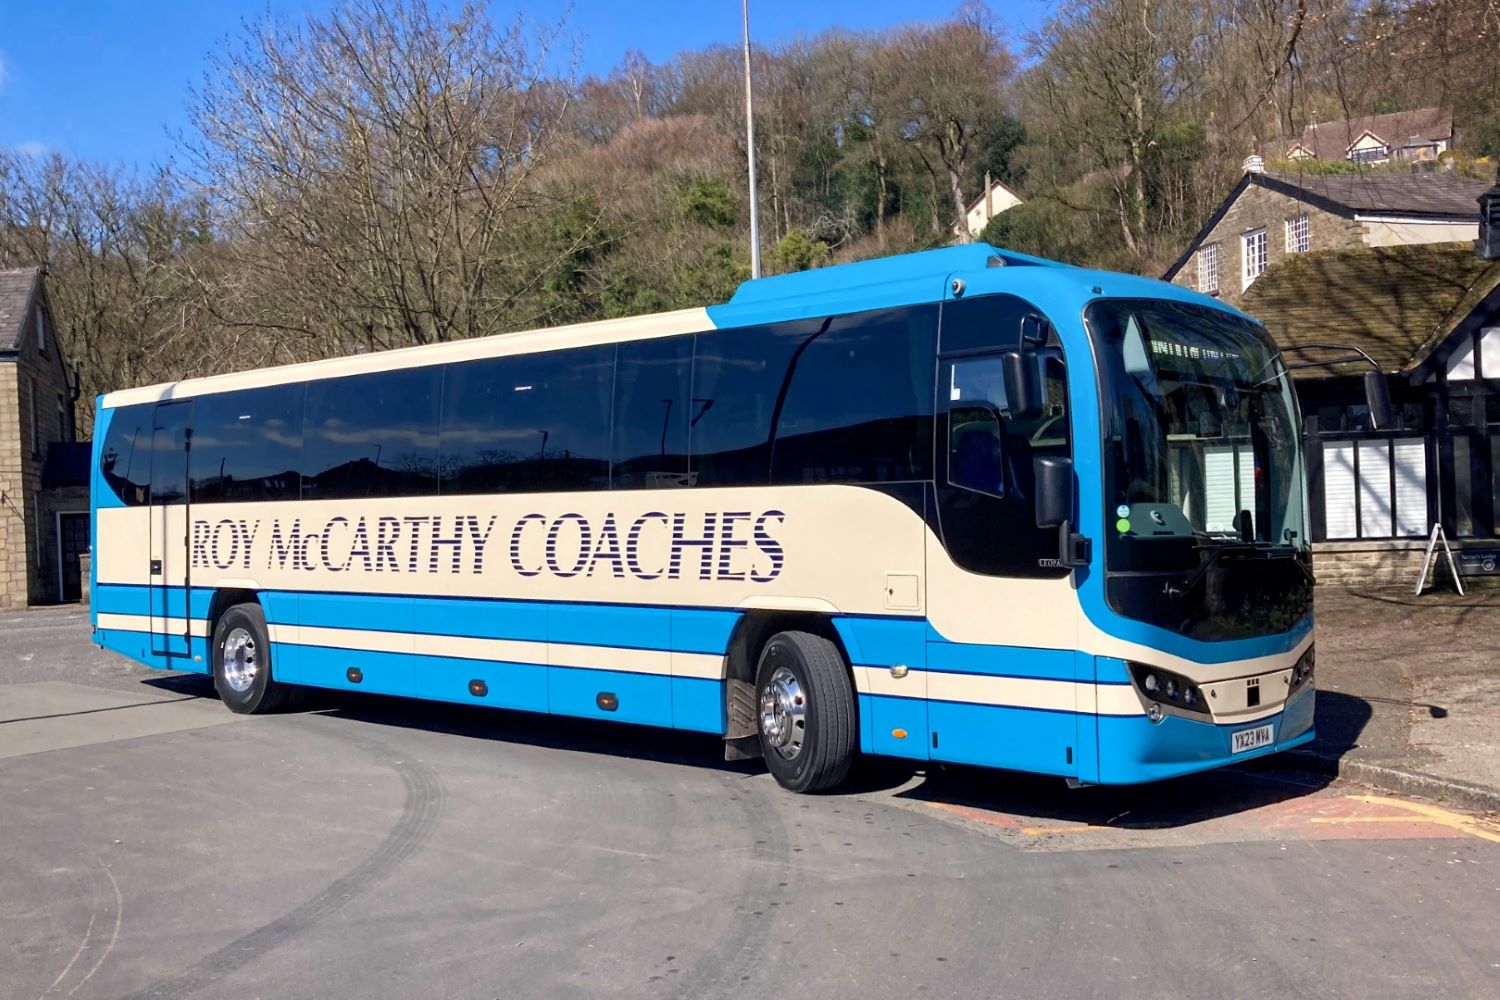 Plaxton Leopard for Roy McCarthy Coaches (resized)